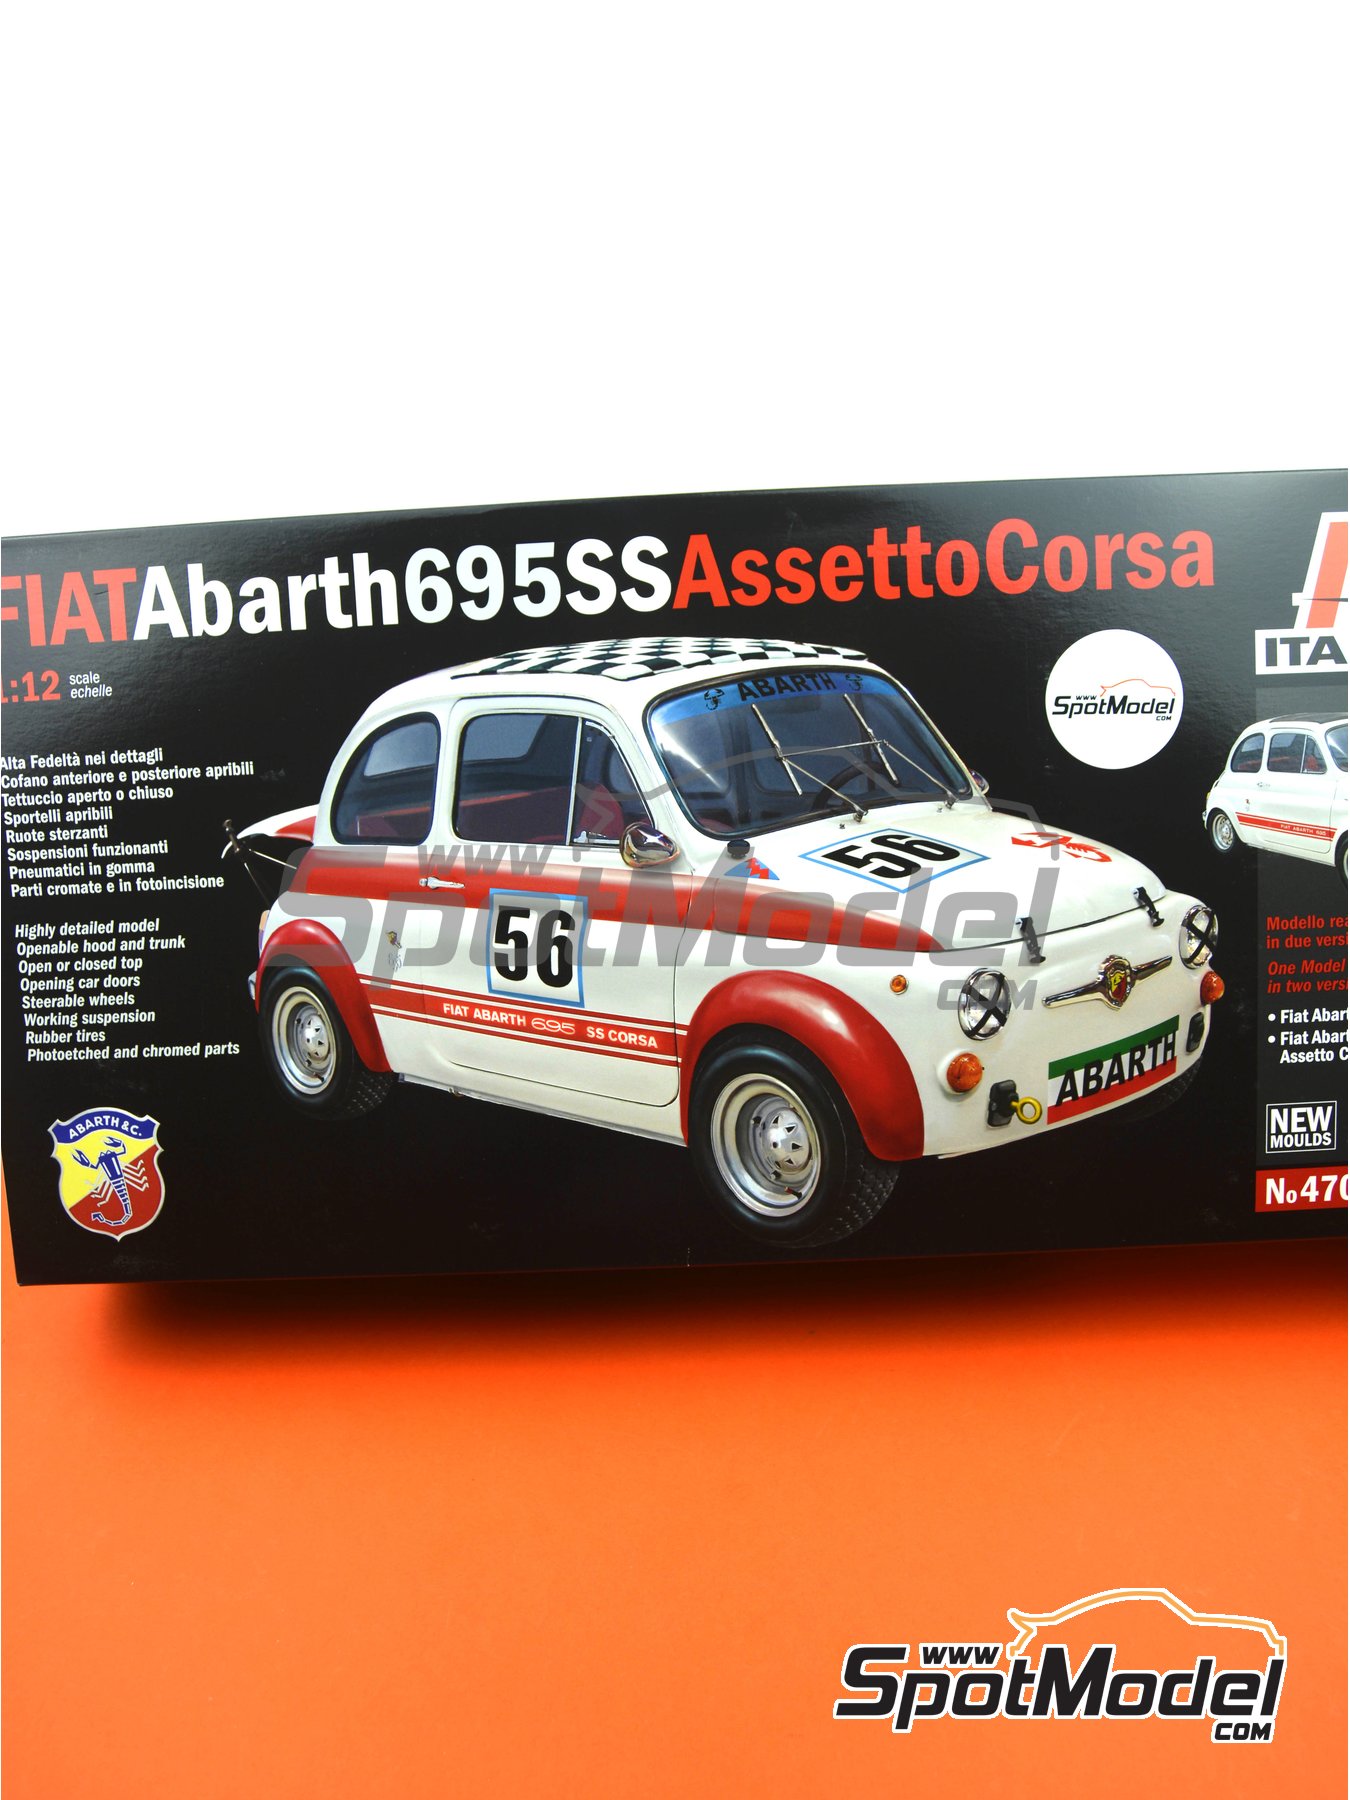 Fiat Abarth 695 SS Assetto Corsa. Car scale model kit in 1/12 scale  manufactured by Italeri (ref. 4705, also 8001283047050, ITA4705 and IT4705)